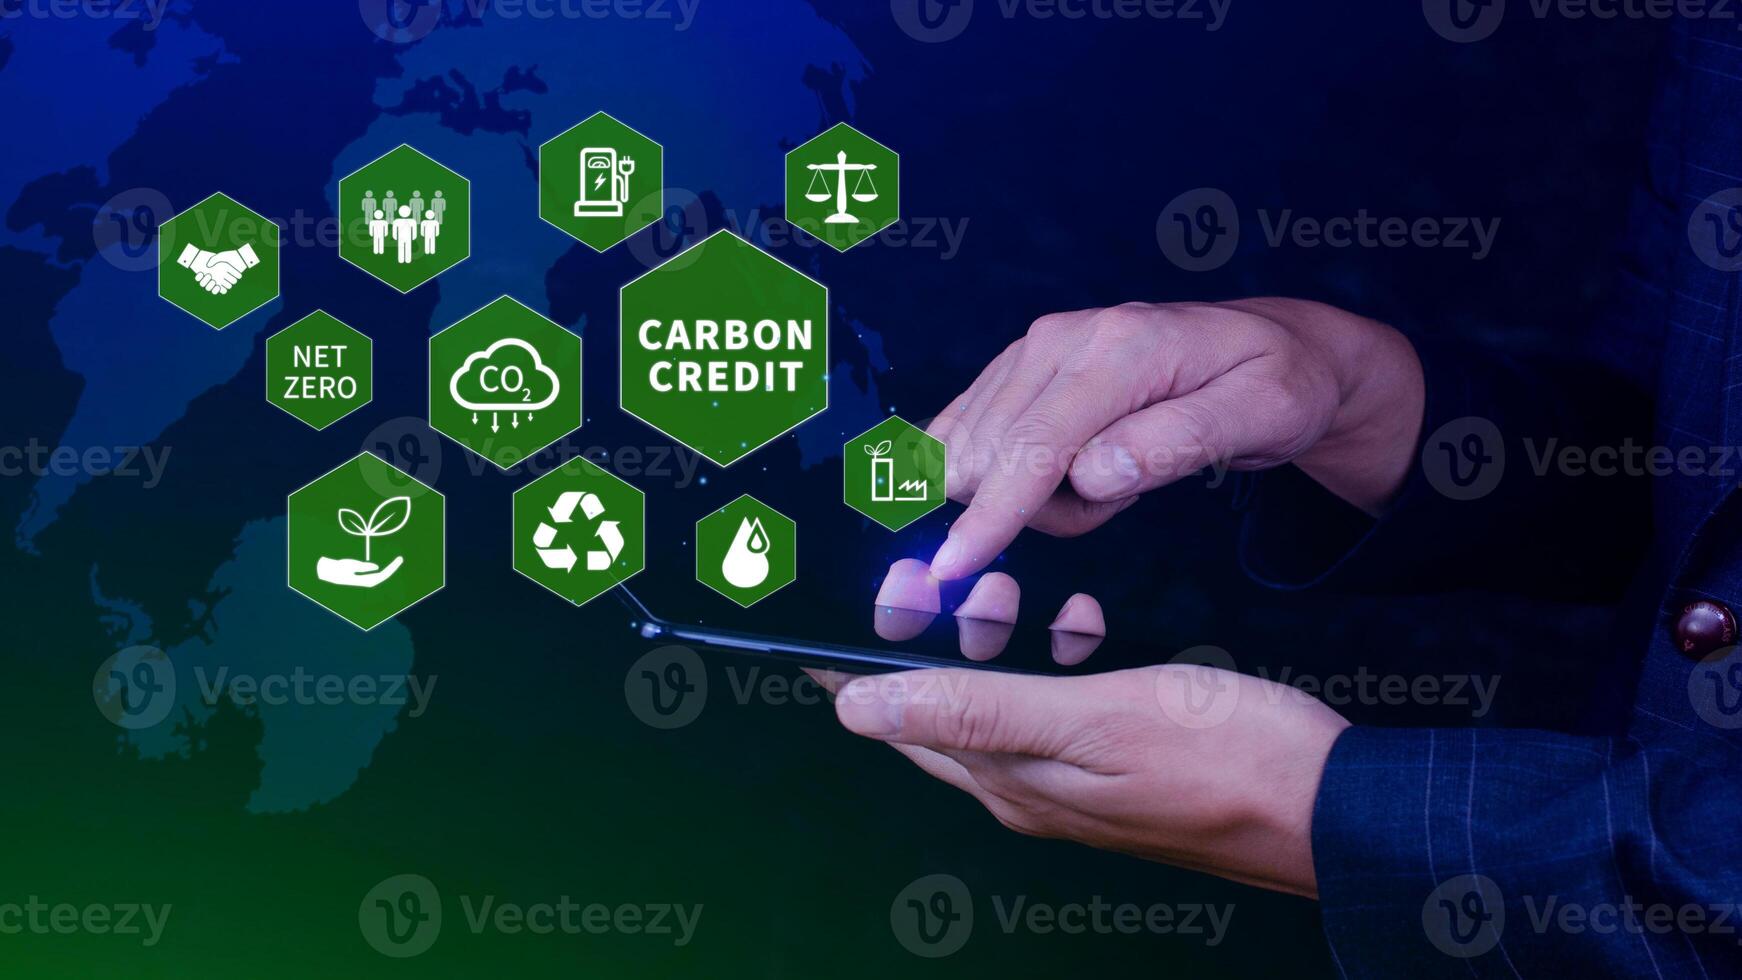 Carbon credit concept, Trader using smartphone to trade carbon credit on application, carbon etf to invest in sustainable business, green climate funds investment, Net zero emission, Clean technology. photo